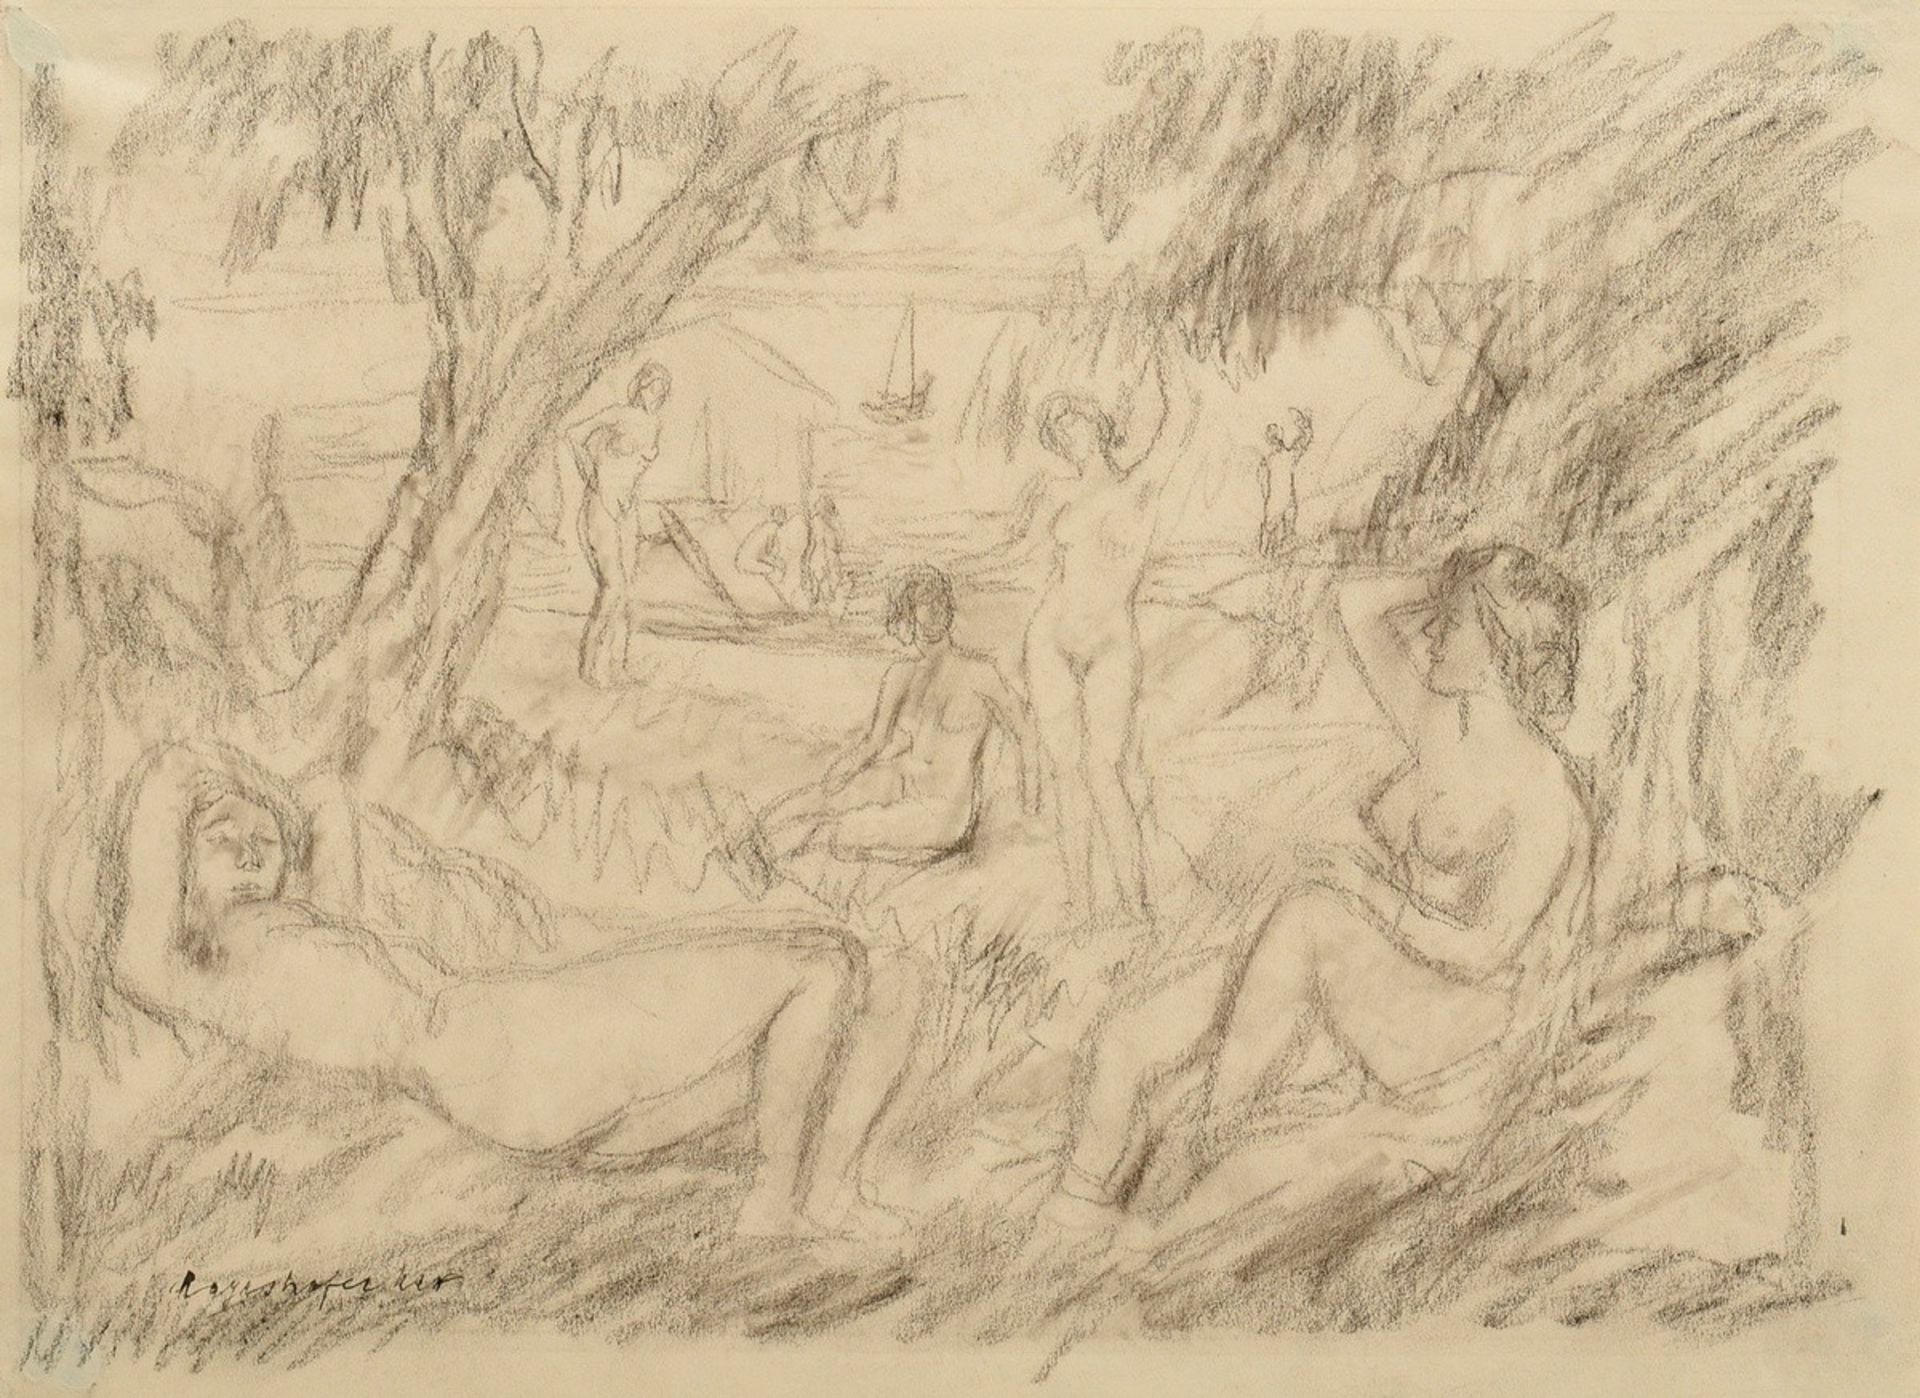 17 Mayershofer, Max (1875-1950) "Female nude drawings", charcoal, each sign., each mounted in passe - Image 11 of 19